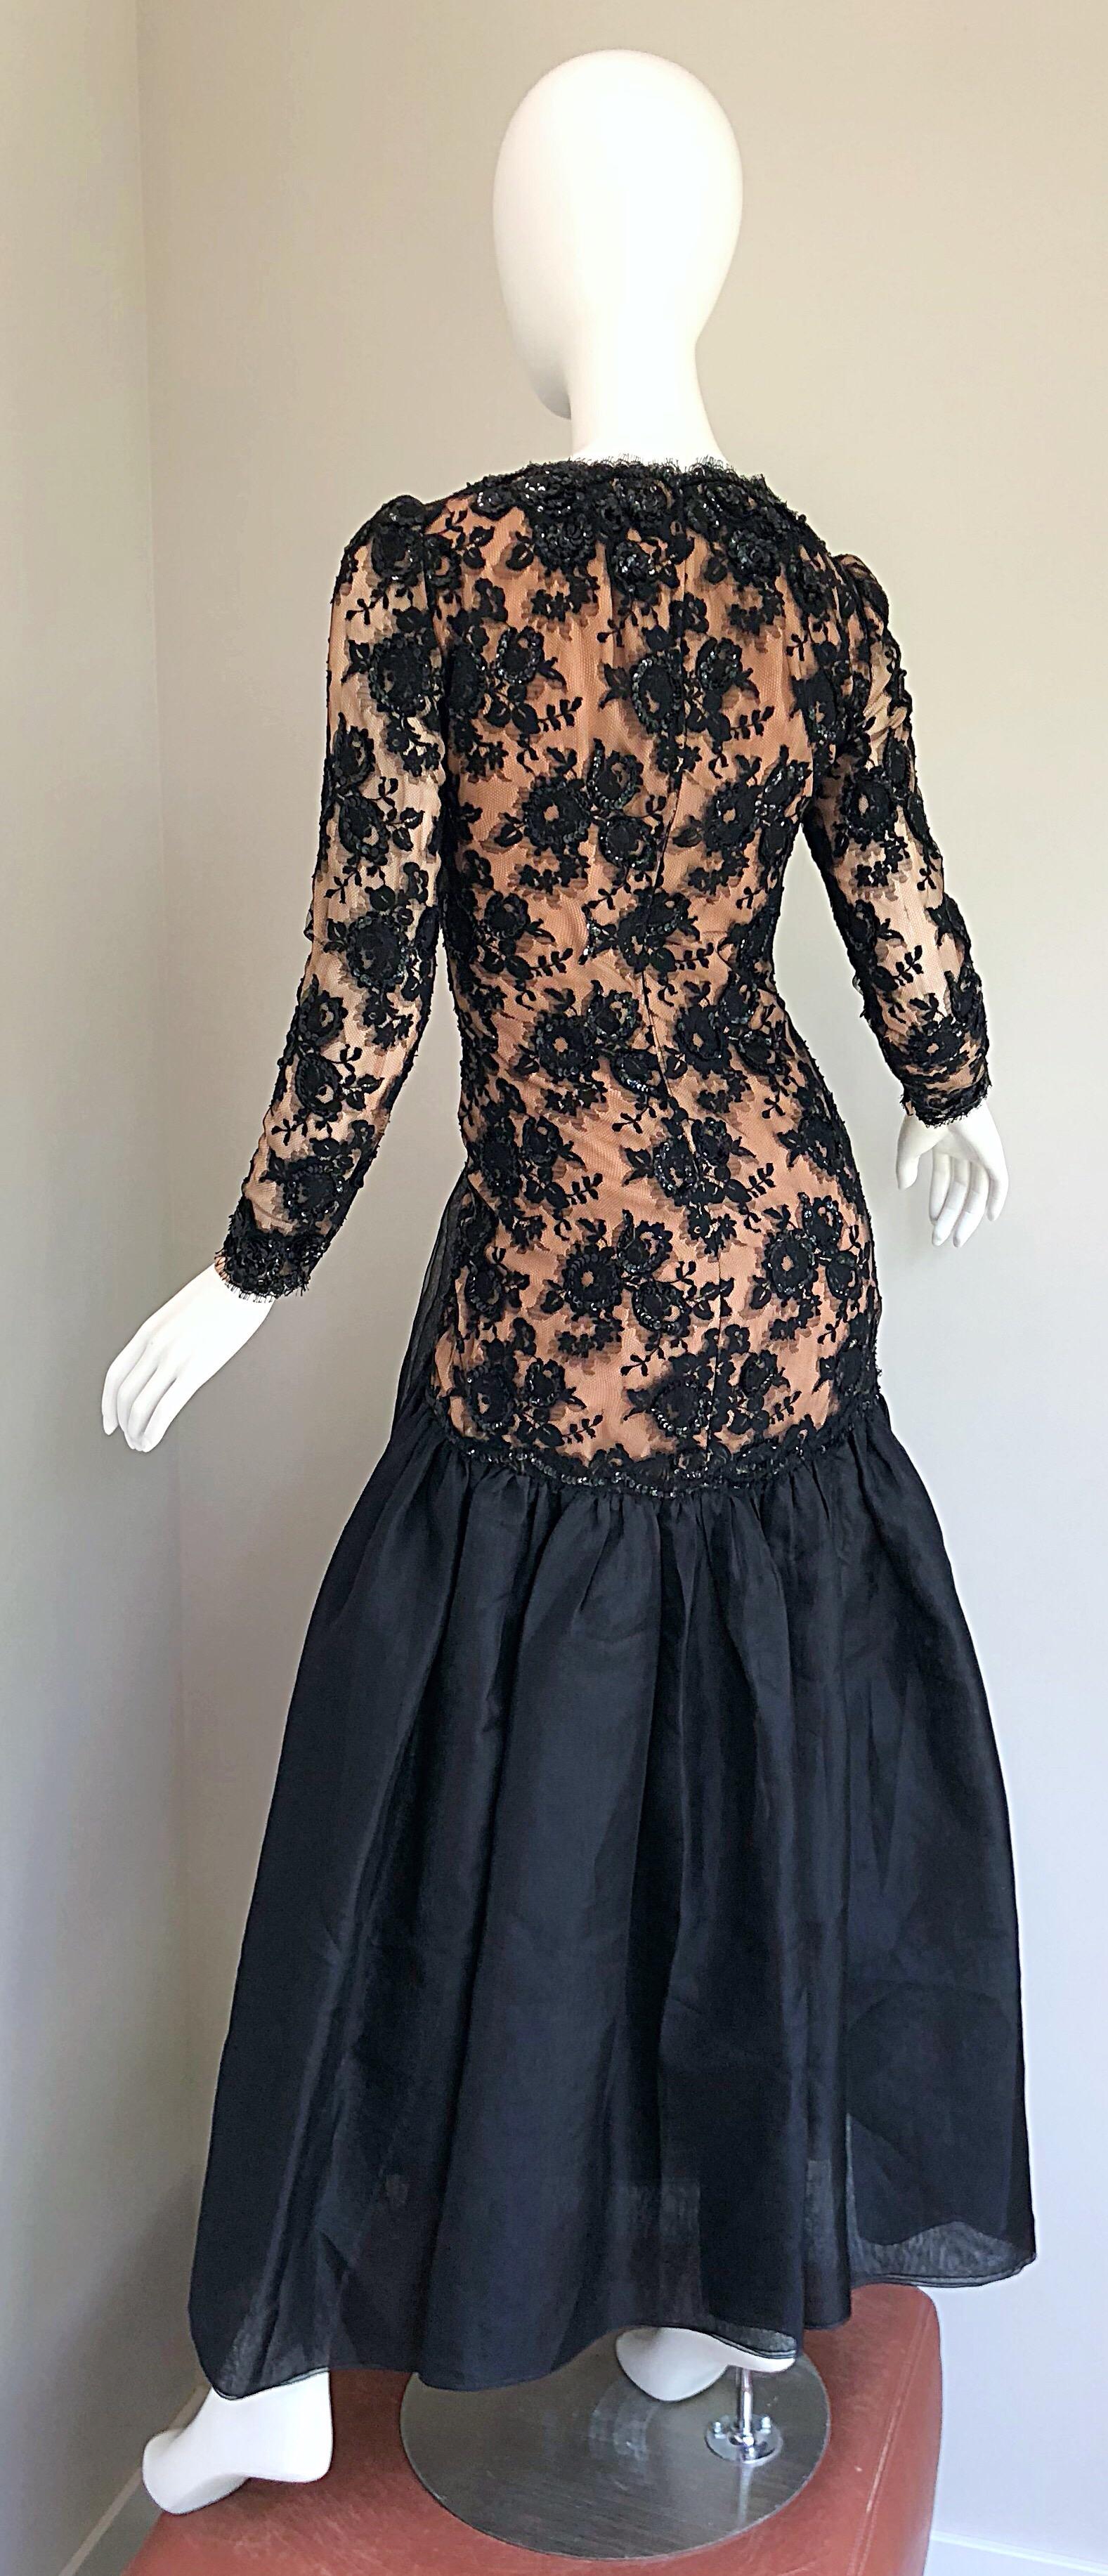 Vintage Bill Blass Black Nude 90s Size 6 / 8 Sequined Chiffon Evening Gown Dress For Sale 7